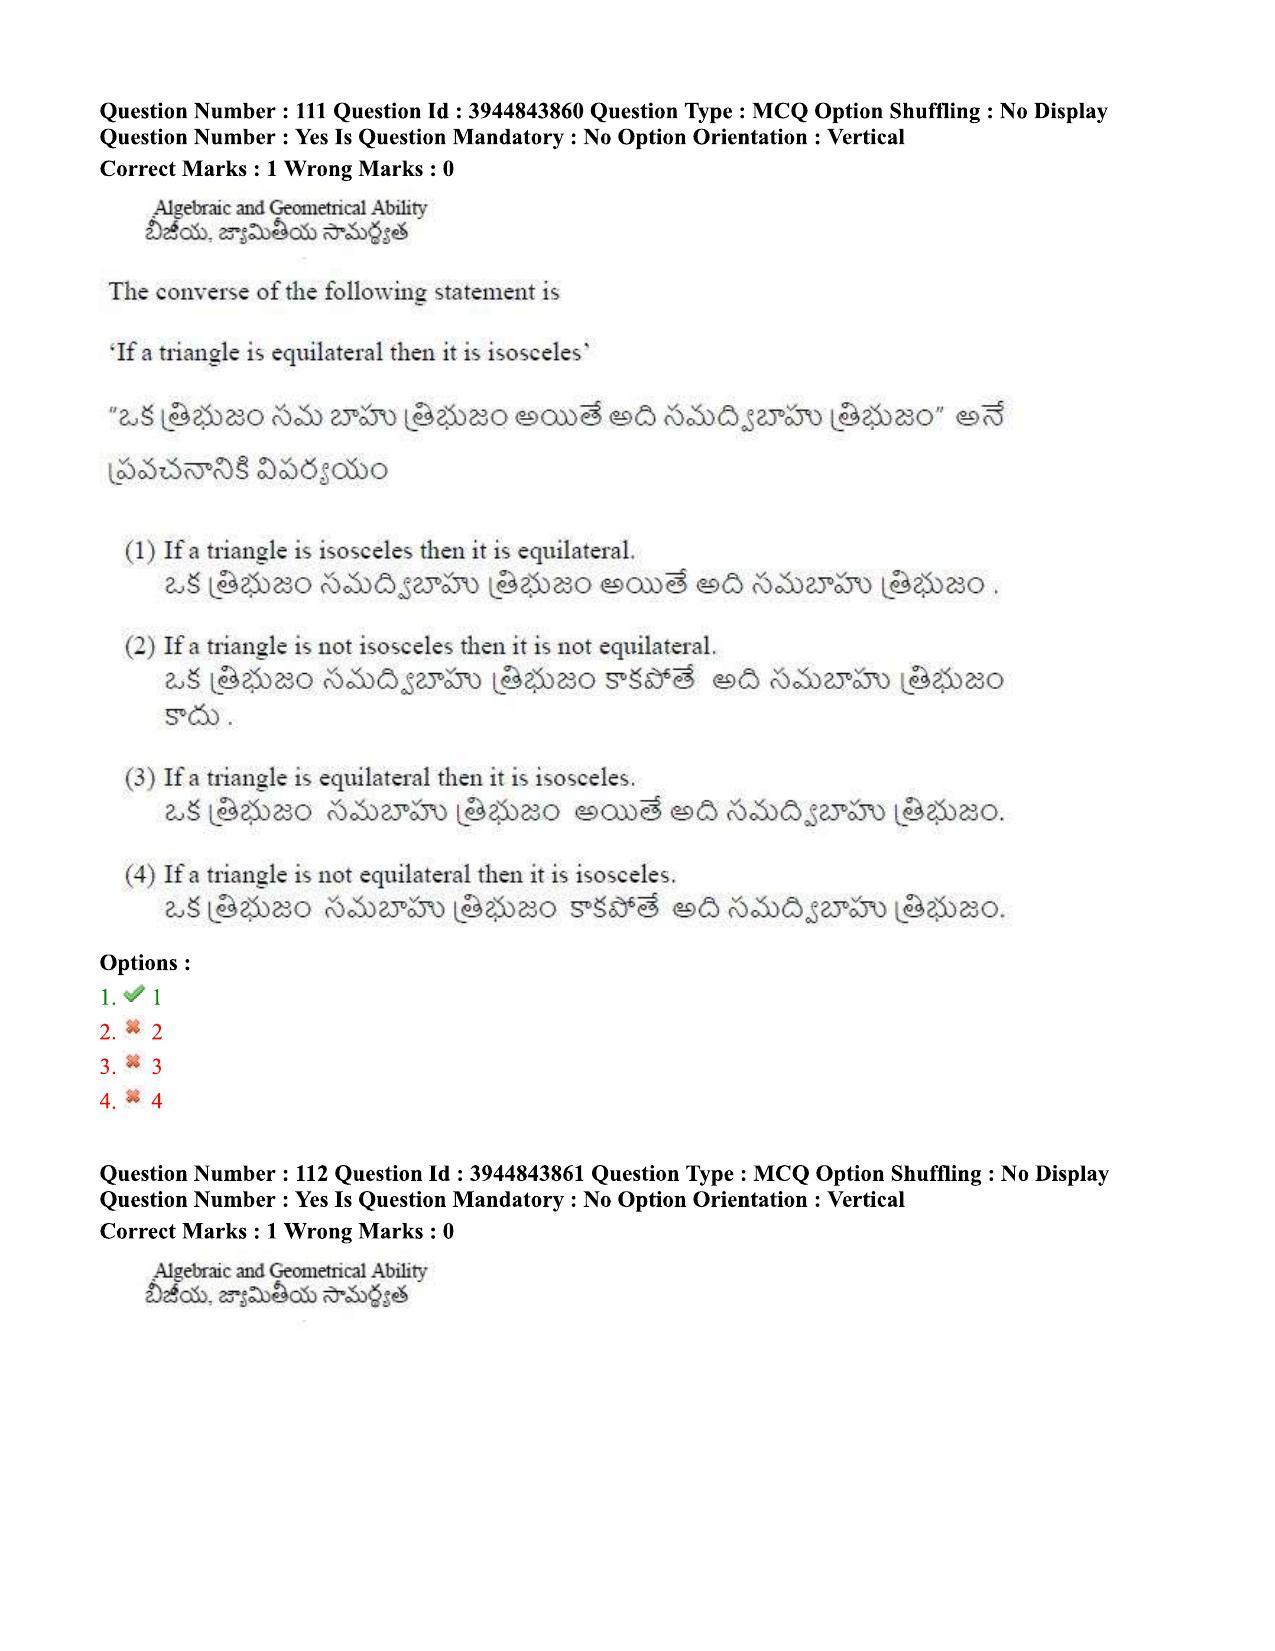 TS ICET 2020 Question Paper 1 - Oct 1, 2020	 - Page 87